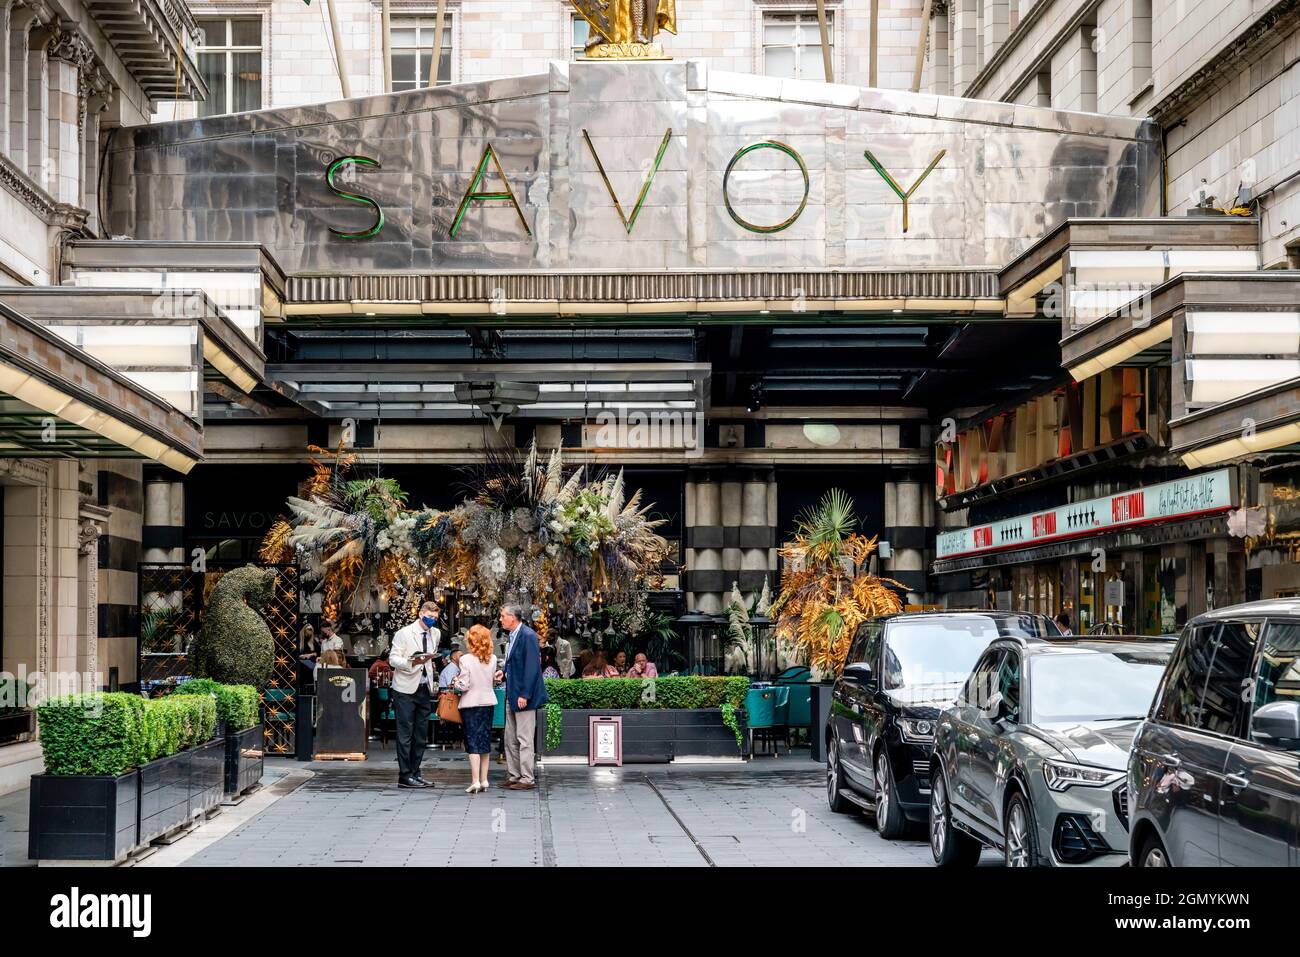 The Savoy Hotel Entrance, The Strand, Londres, Royaume-Uni. Banque D'Images